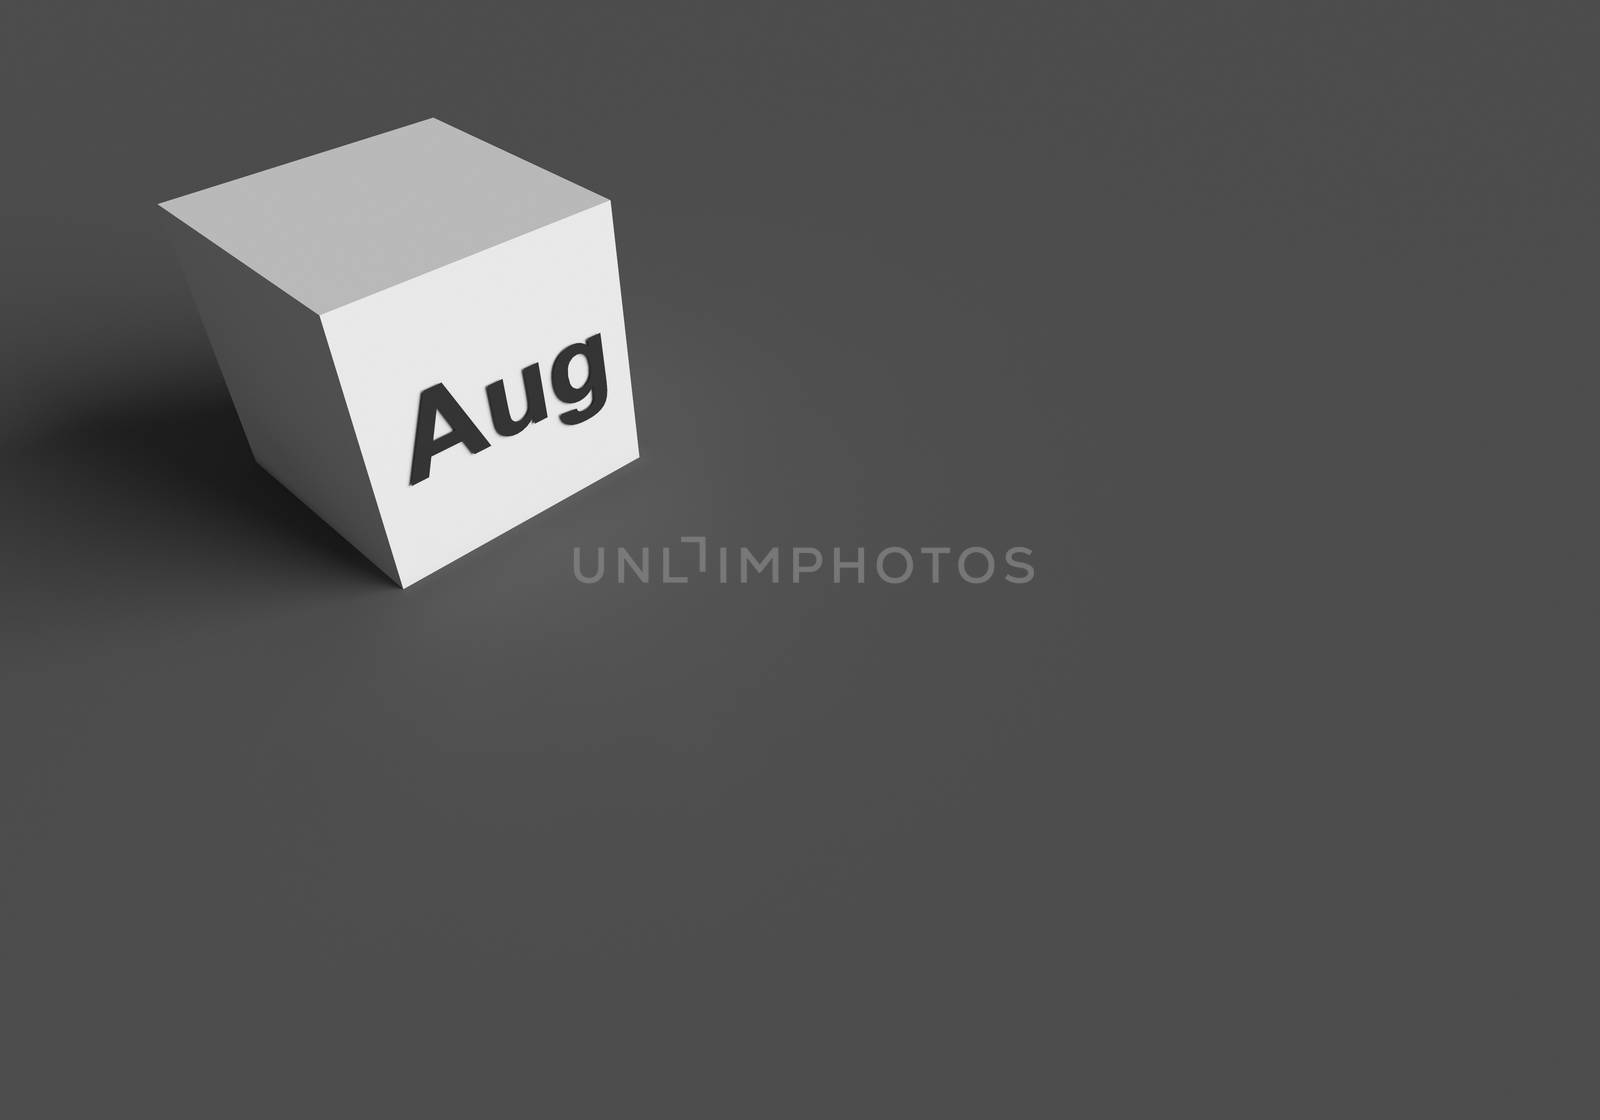 3D RENDERING OF "Aug" (ABBREVIATION OF AUGUST) by PrettyTG